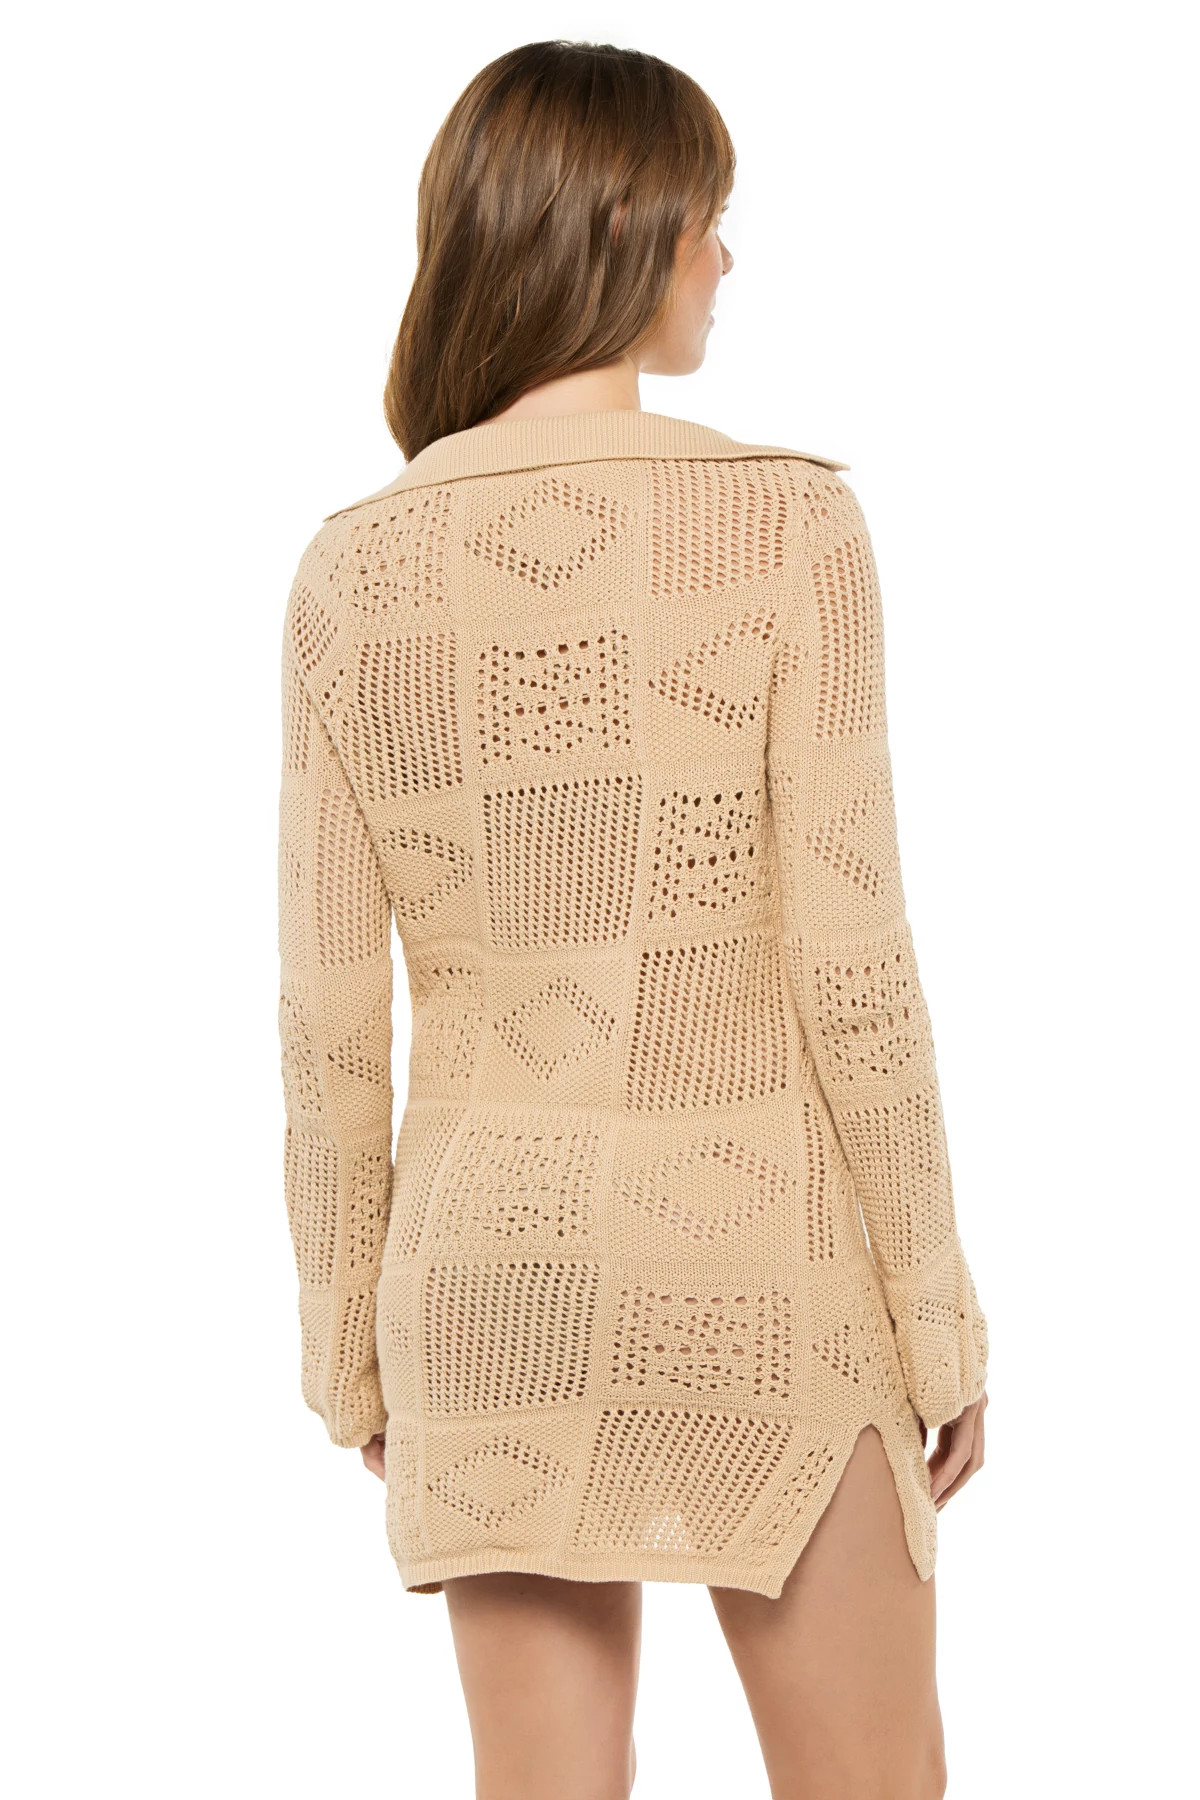 NATURAL Clementine Knit Cardigan image number 3